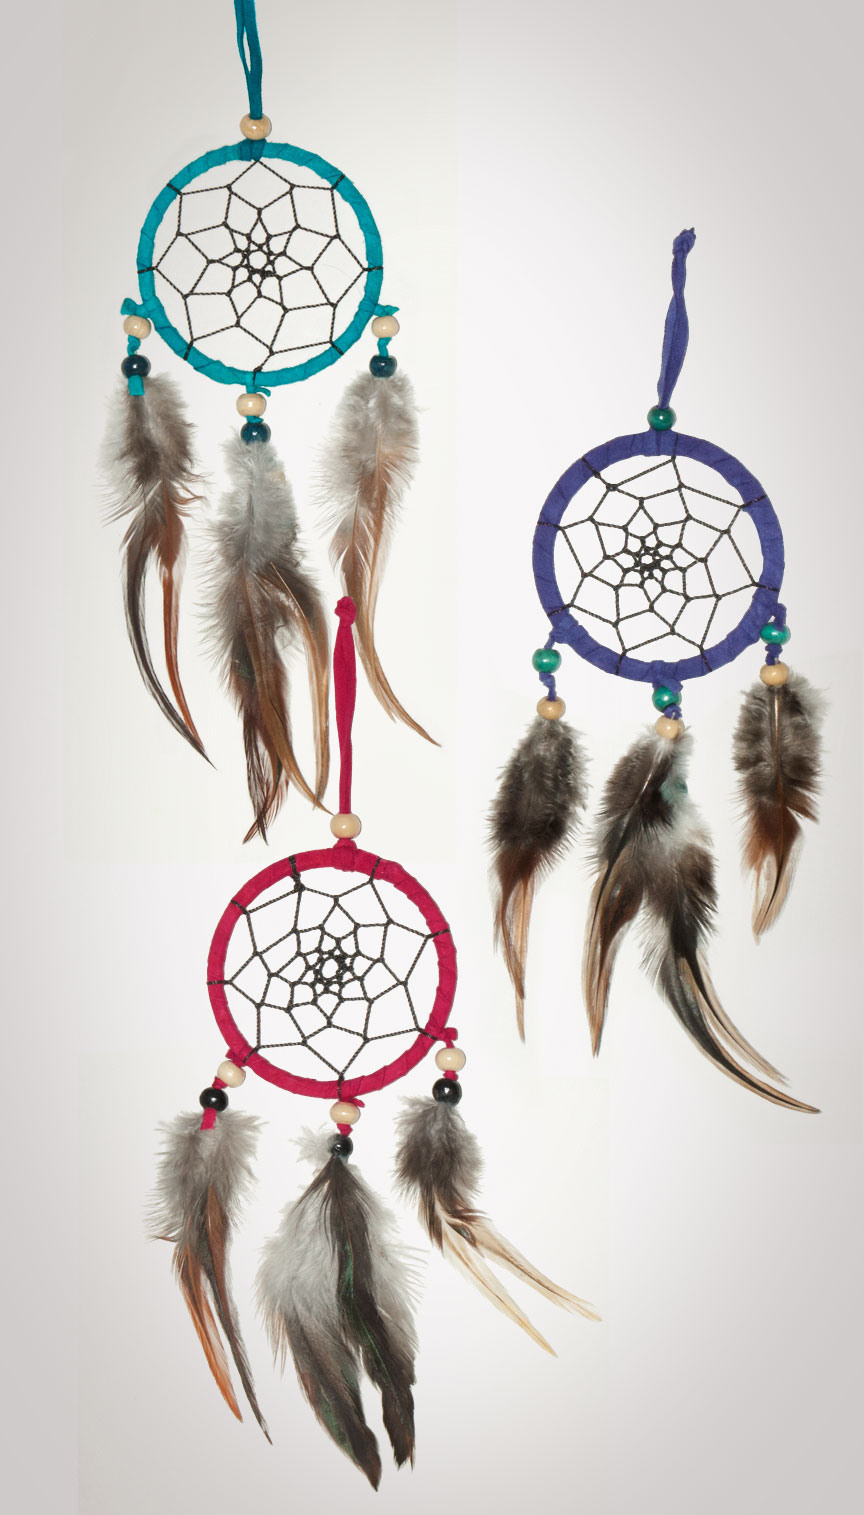 Shows the 3 dreamcatchers from our cool colors dreamcatcher set owg015